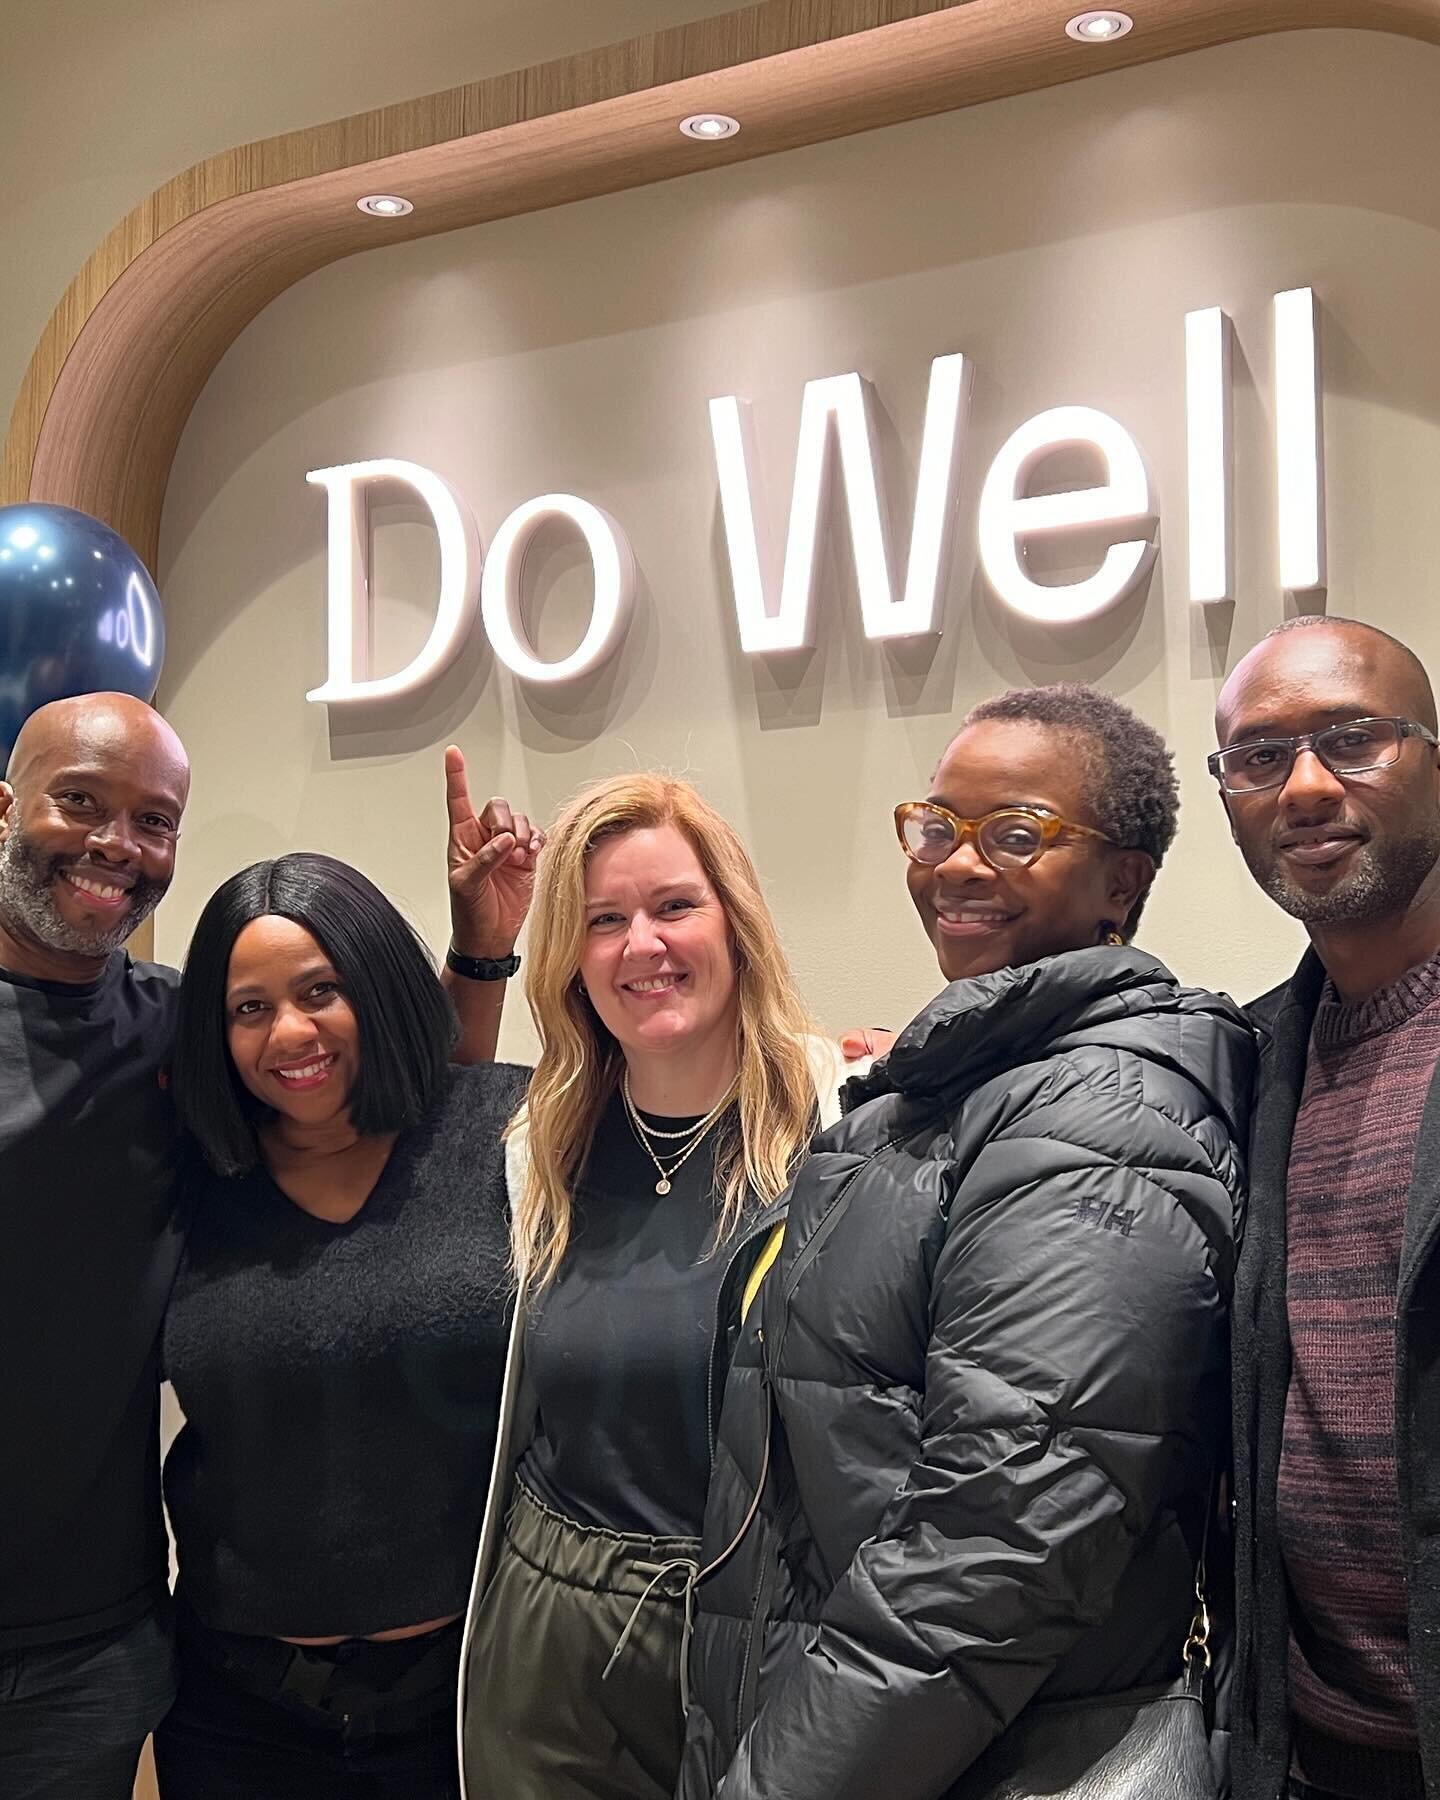 Last night, @we.do.well celebrated its official opening with an epic launch party! Co-founders @andrewsabarre and @lumbachristina have crafted something truly special, and I&rsquo;m grateful to be part of this incredible team. The future looks bright